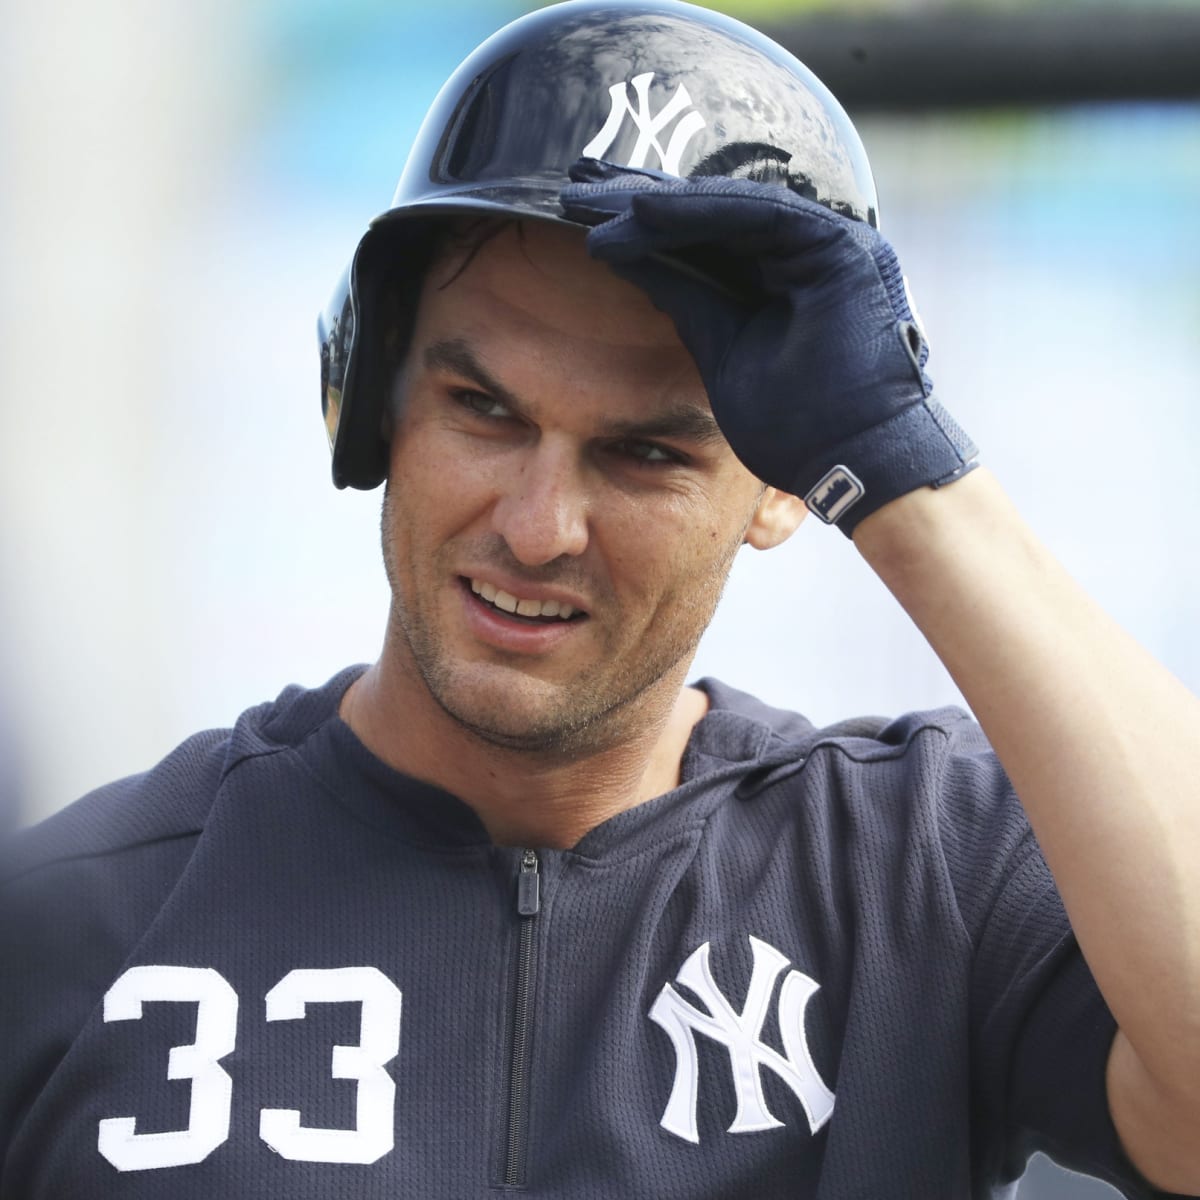 GREG BIRD IS BACK WITH THE YANKEES (2022) 